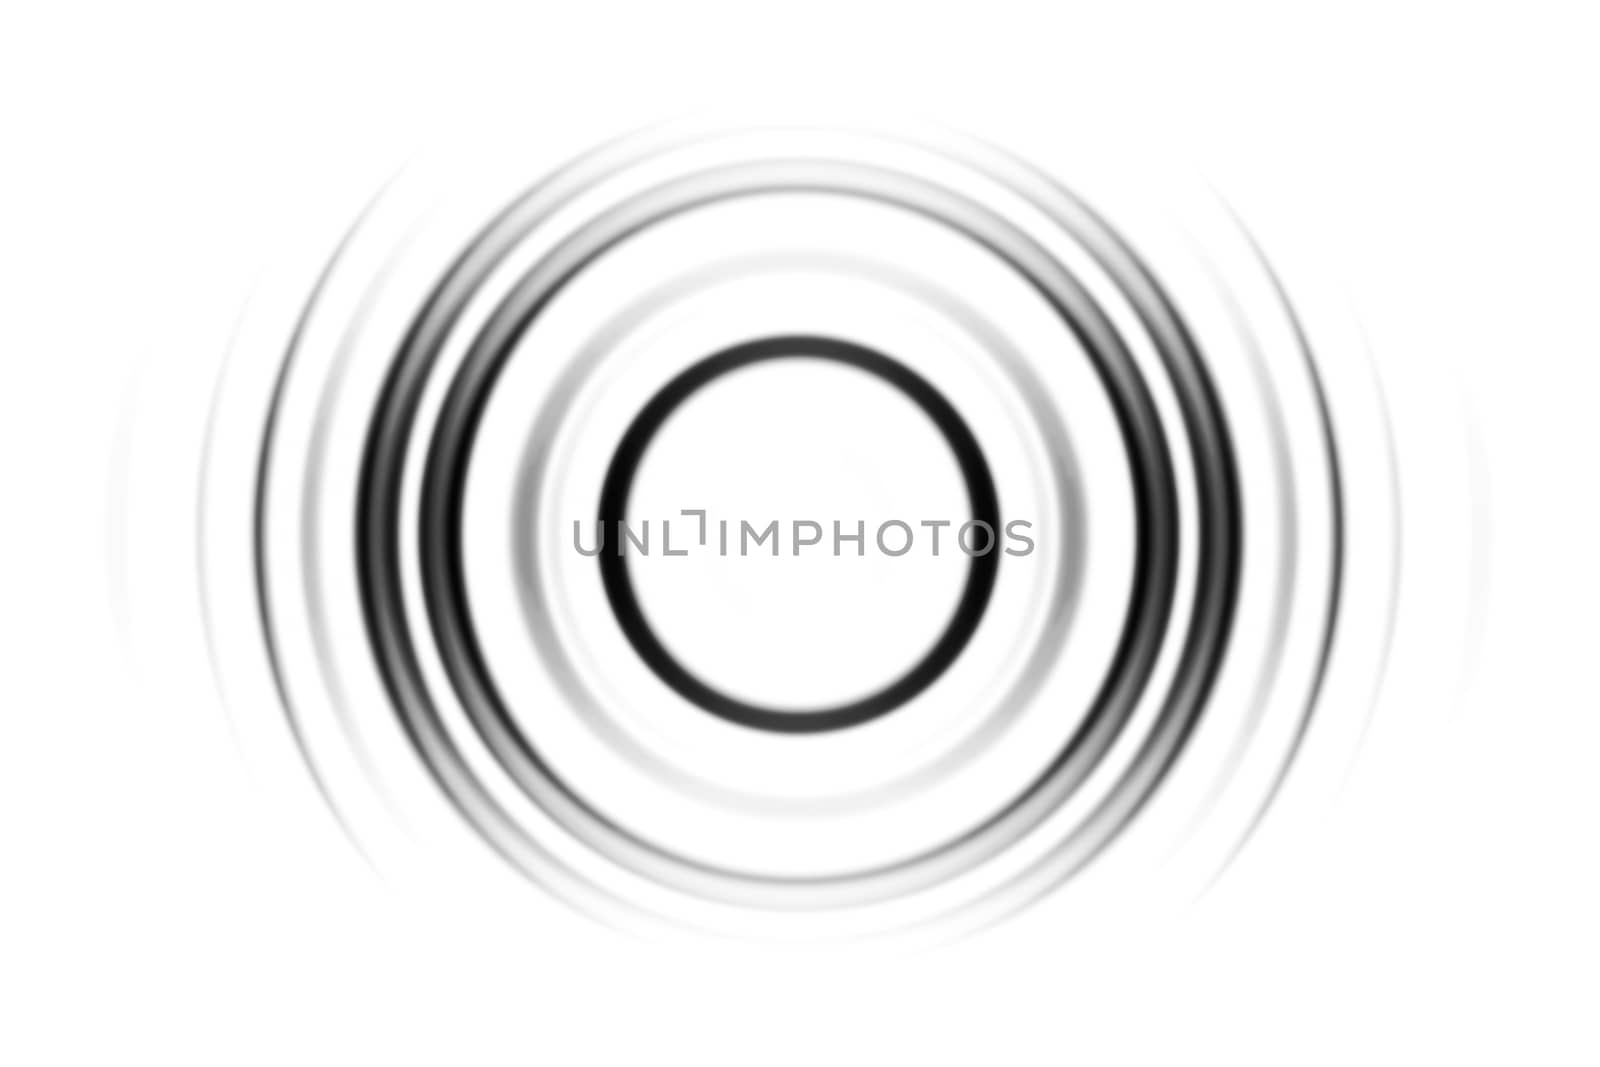 Blurred, abstract  black vortex, circle spin on white background